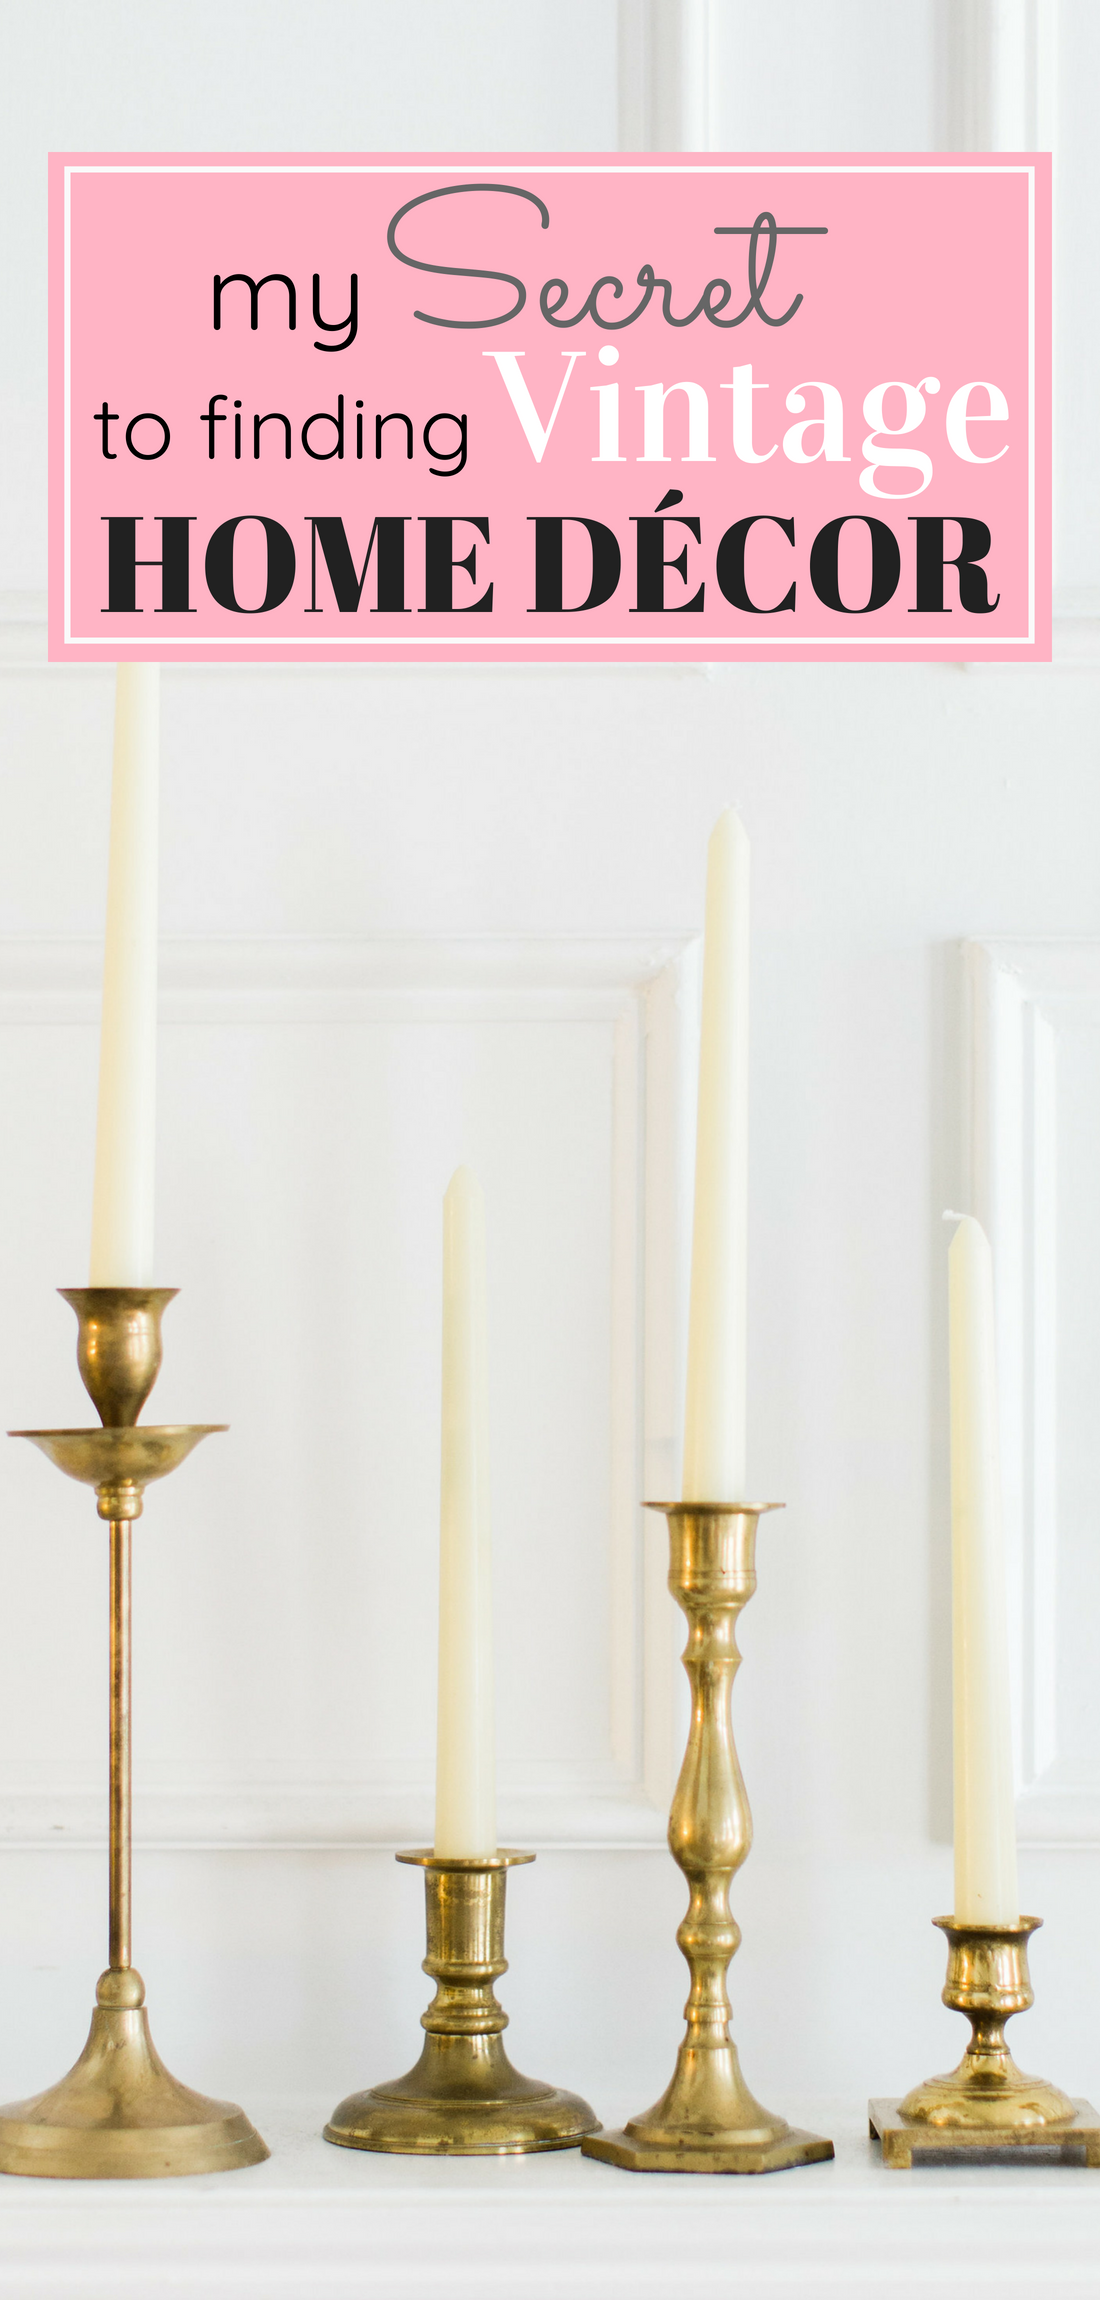 Lifestyle and Home blogger Lexi of Glitter, Inc. shares an awesome trick for finding great vintage home décor items - plus, the best places for thrifting - including how she stumbled upon these vintage brass candlestick holders for less than a dollar. Click through for the details. #vintage #brasscandlesticks #brasscandles #brasscandleholders #thrifting | glitterinc.com | @glitterinc